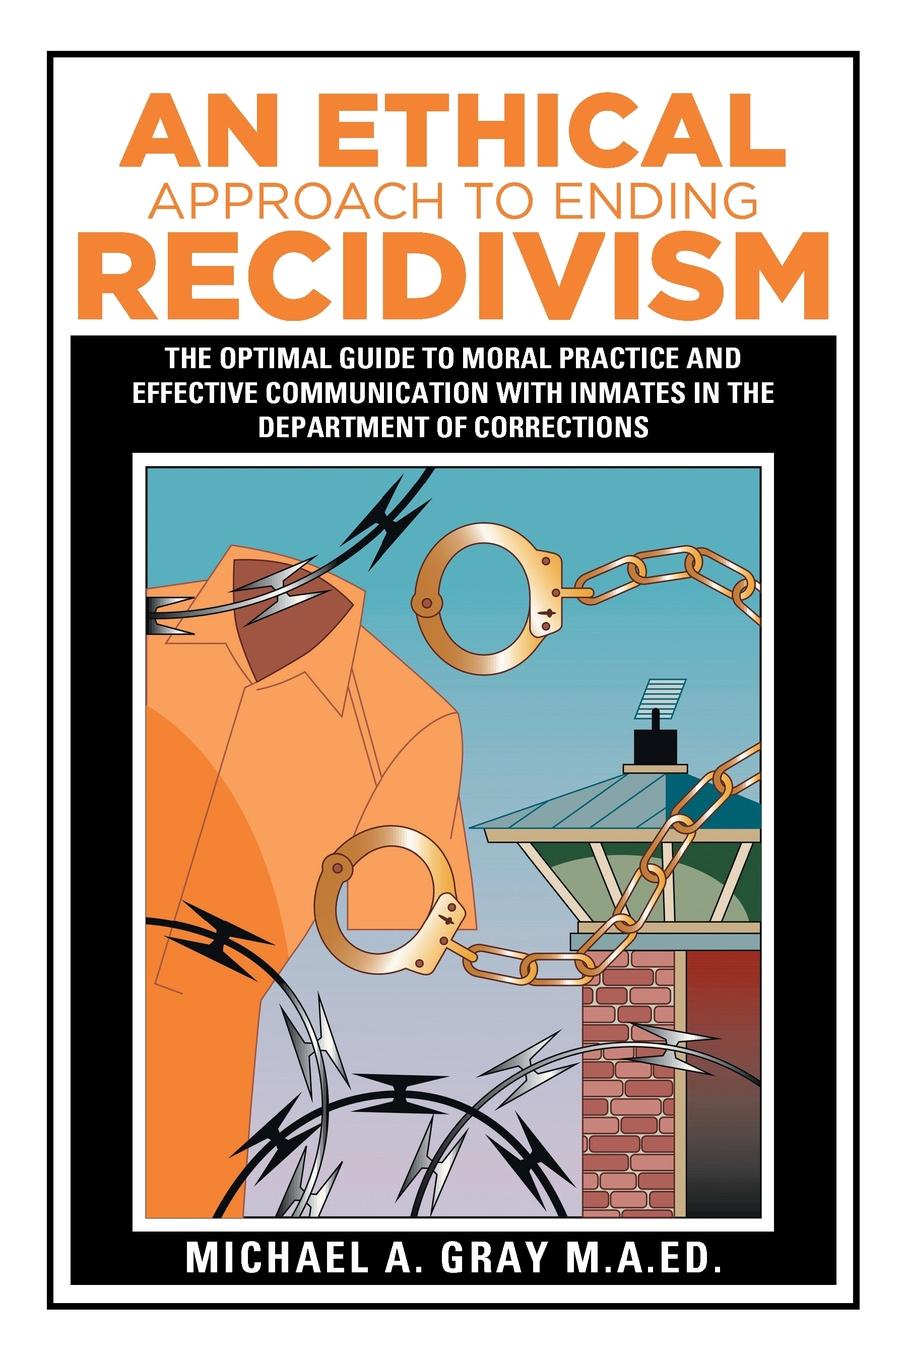 An Ethical Approach to Ending Recidivism. The Optimal Guide to Moral Practice and Effective Communication with Inmates in the Department of Corrections